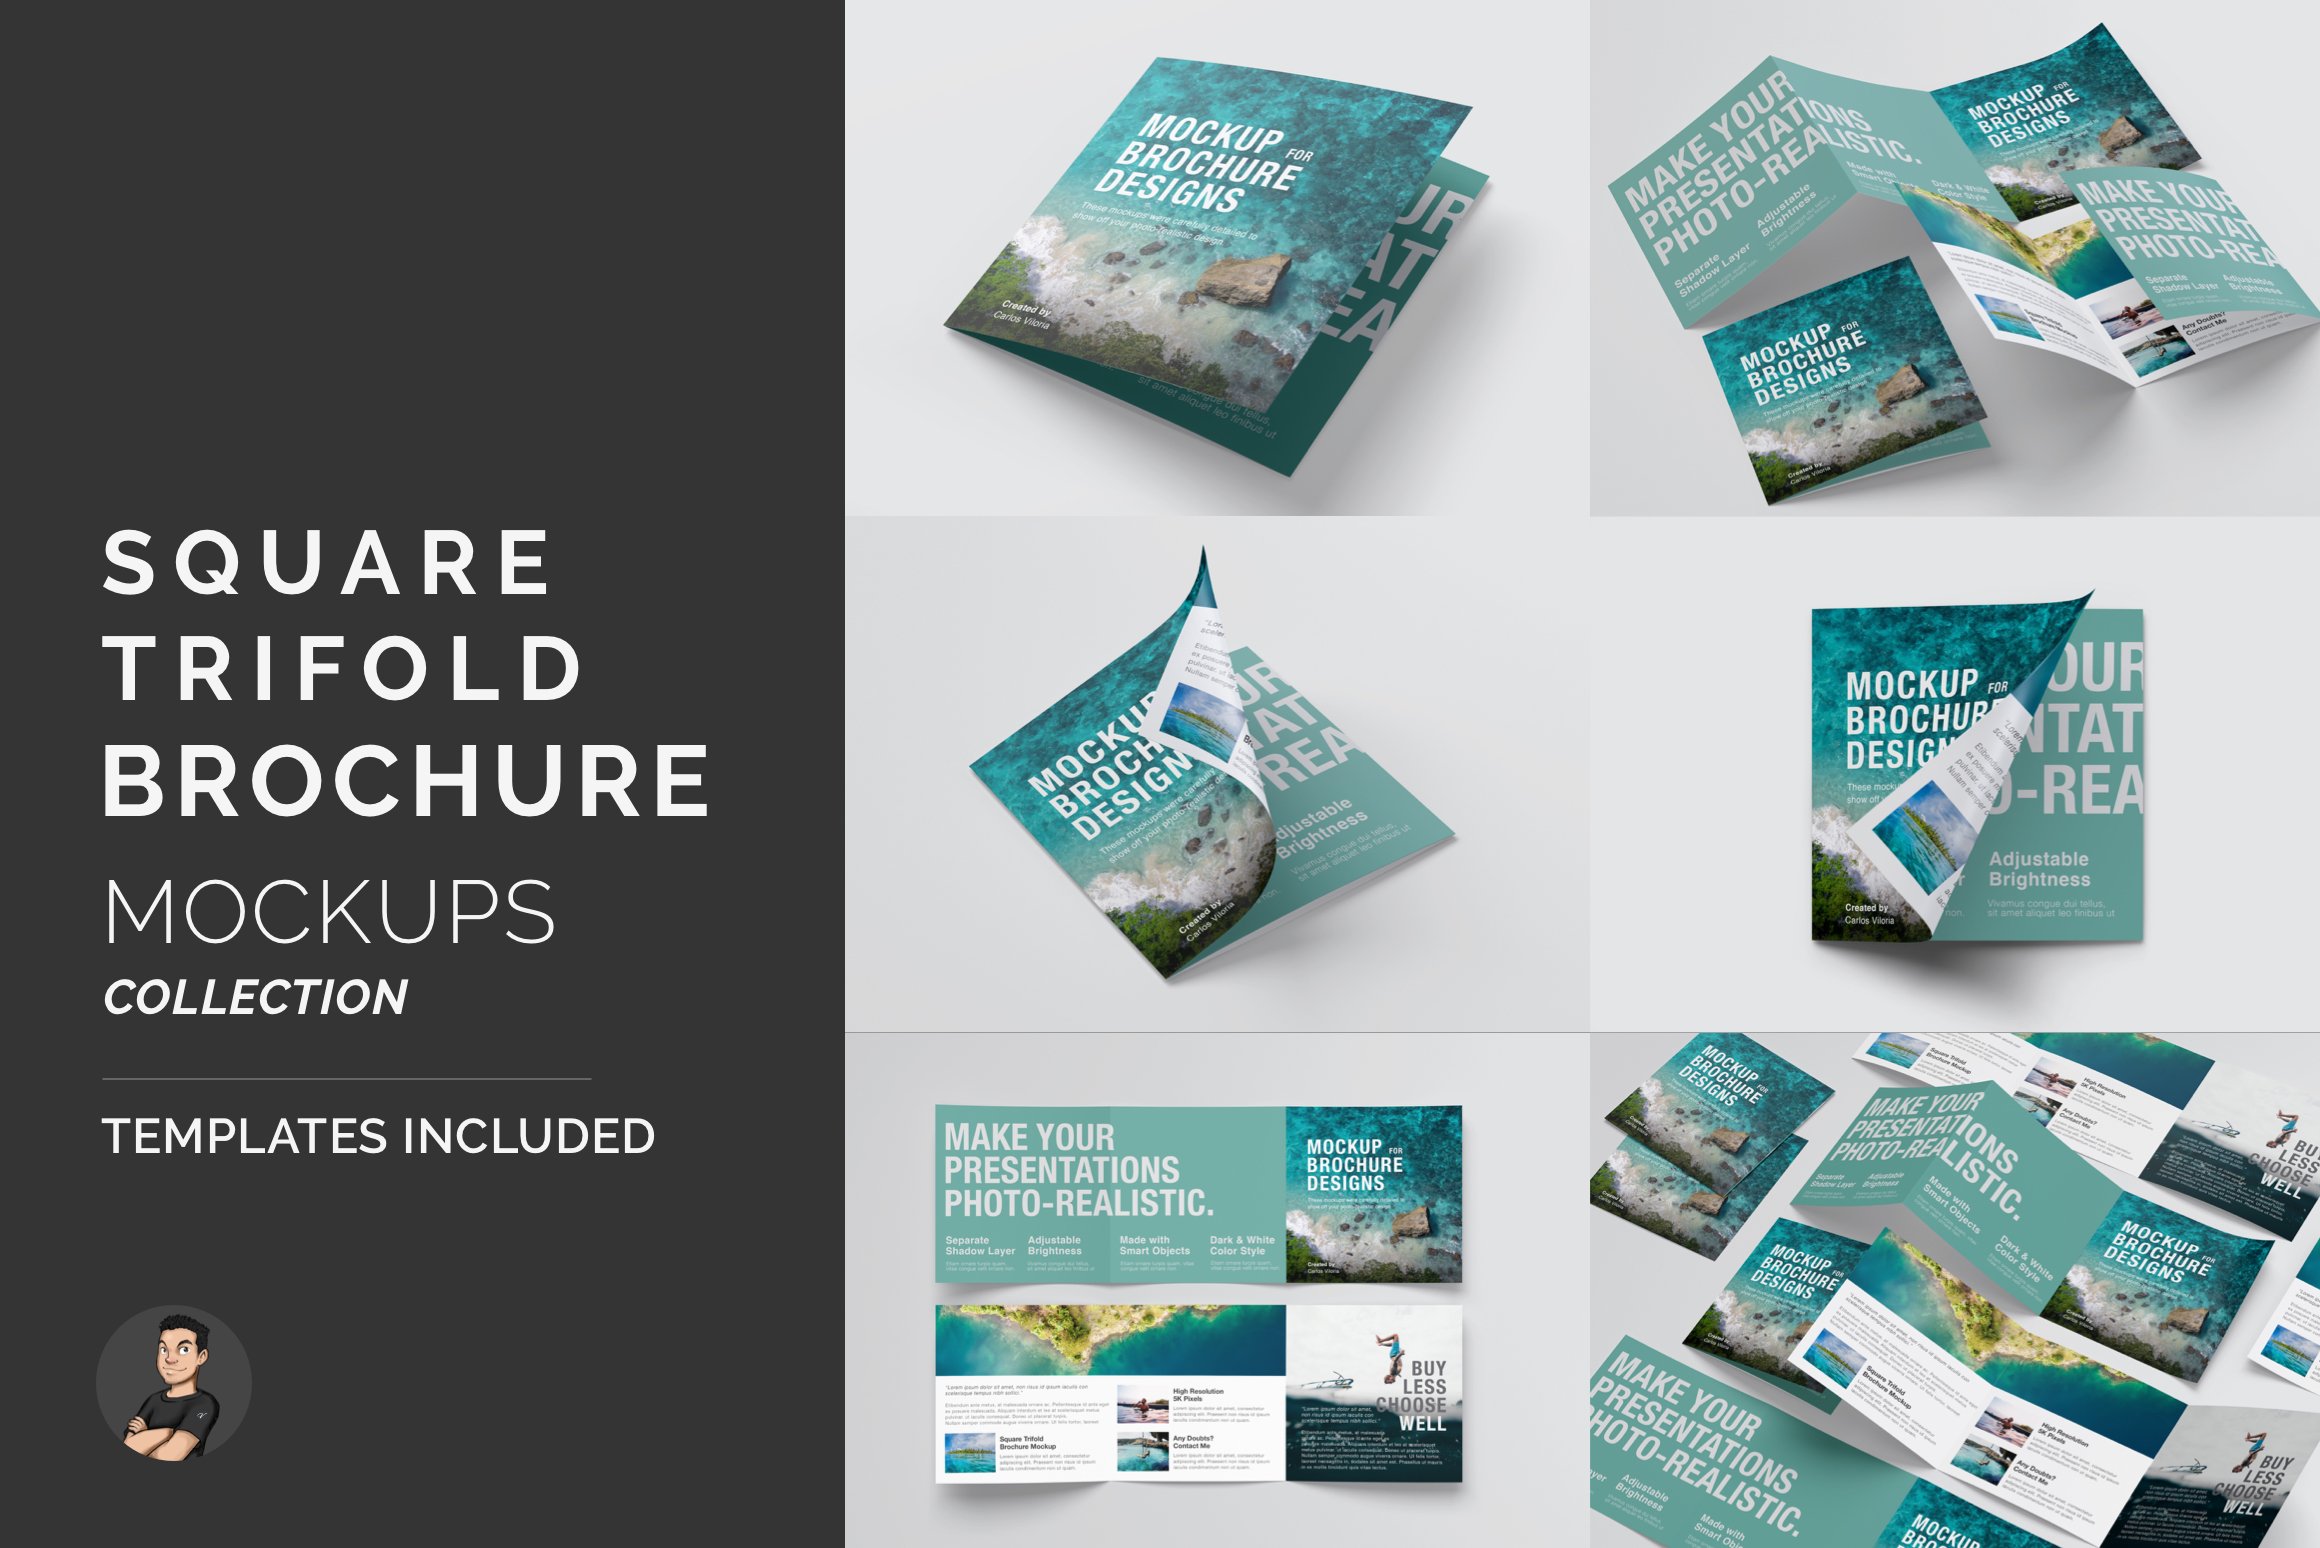 Square Trifold Brochure Mockups cover image.